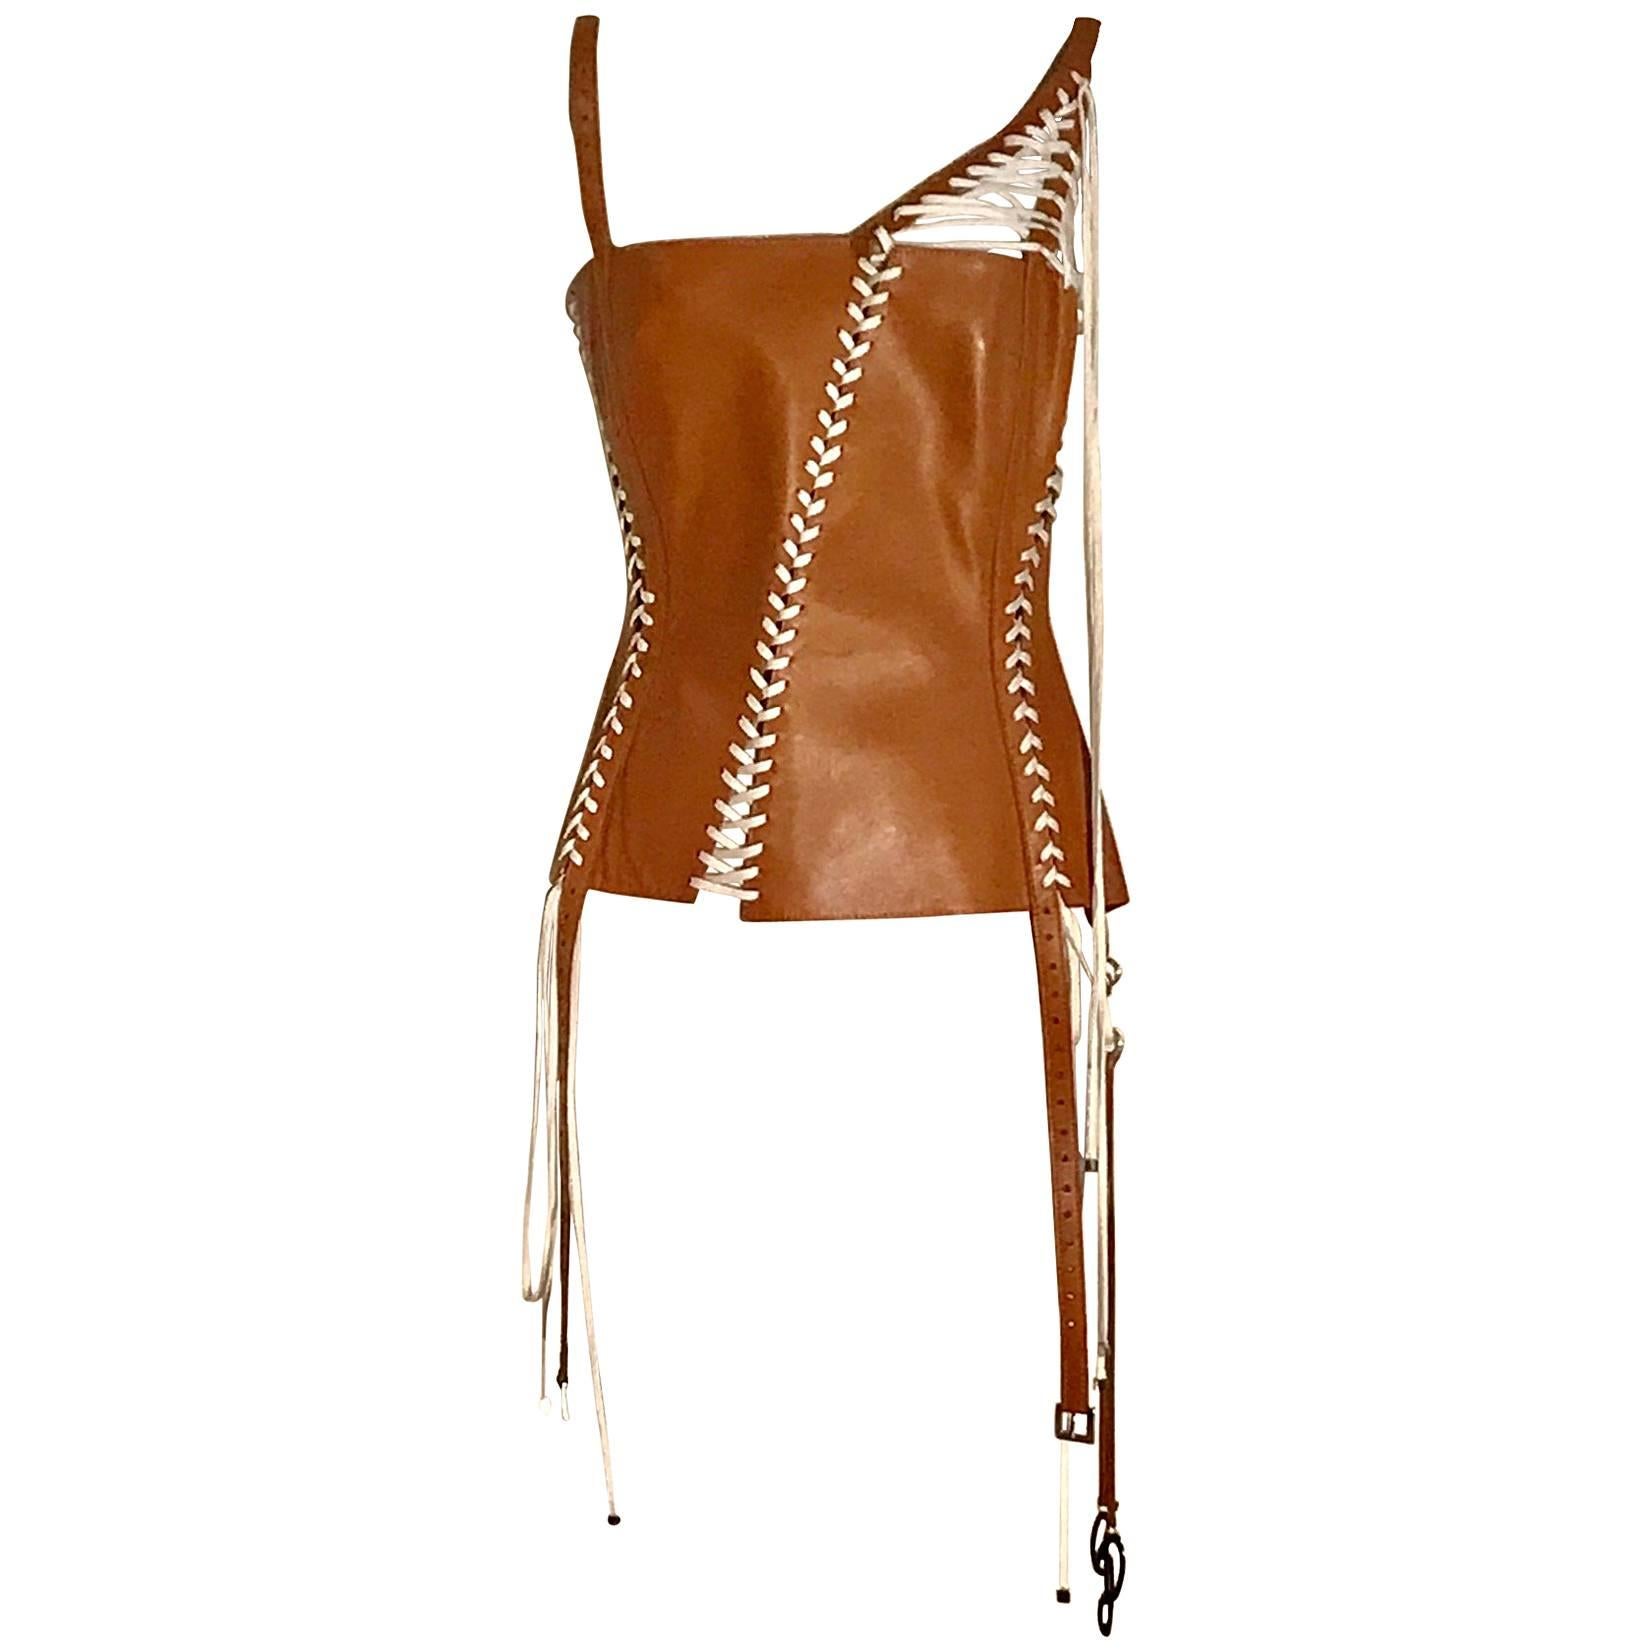 Dolce & Gabbana Tan Brown Leather Laced Corset Bustier  Style Tank Top